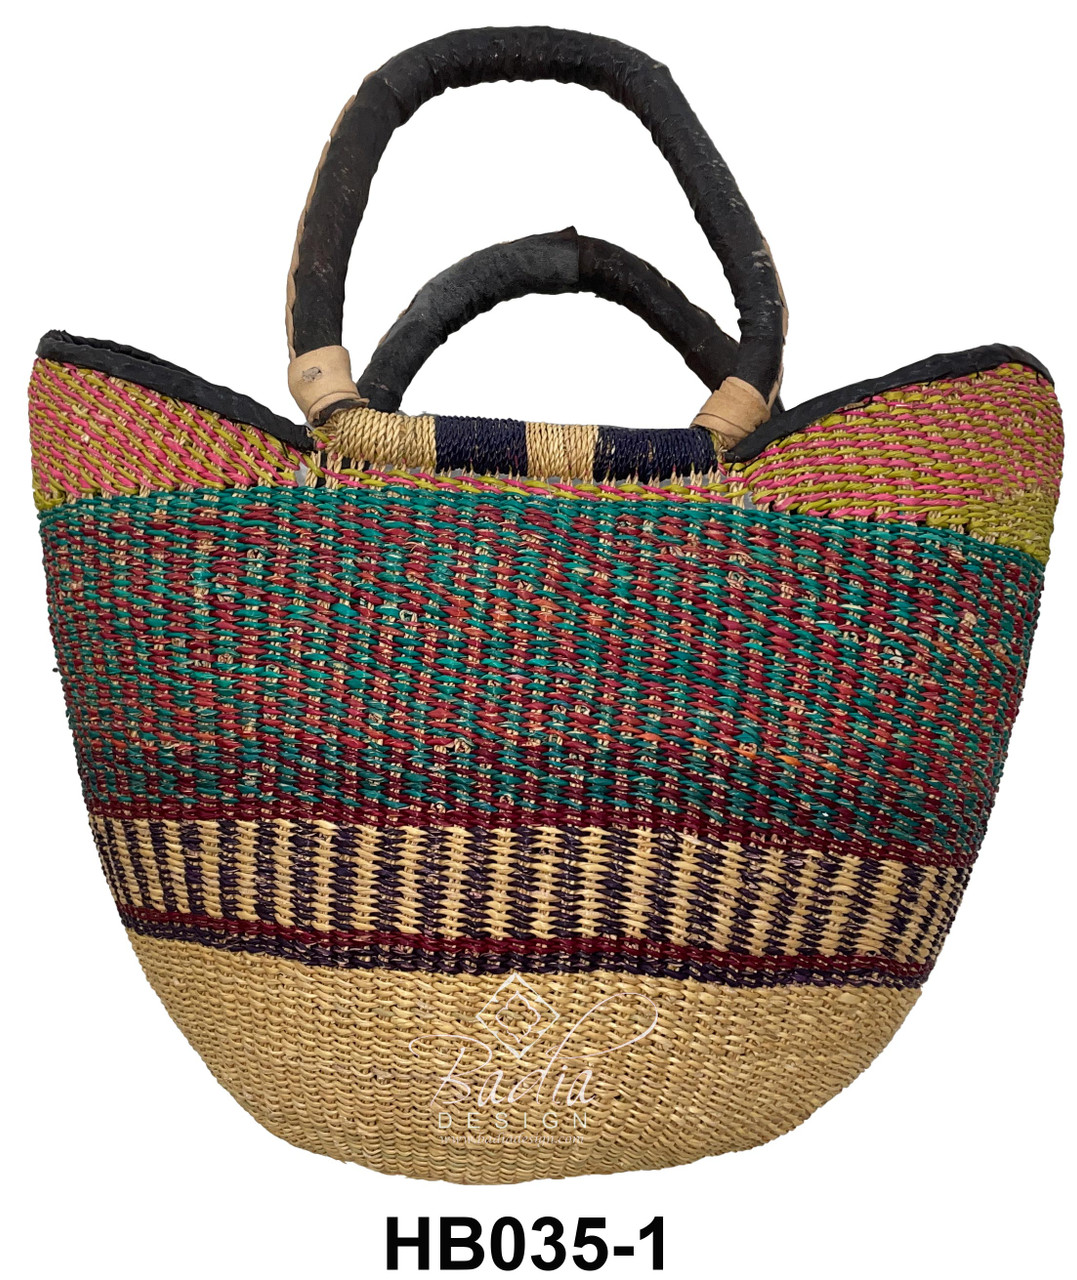 Colorful African Straw Handbags - HB035